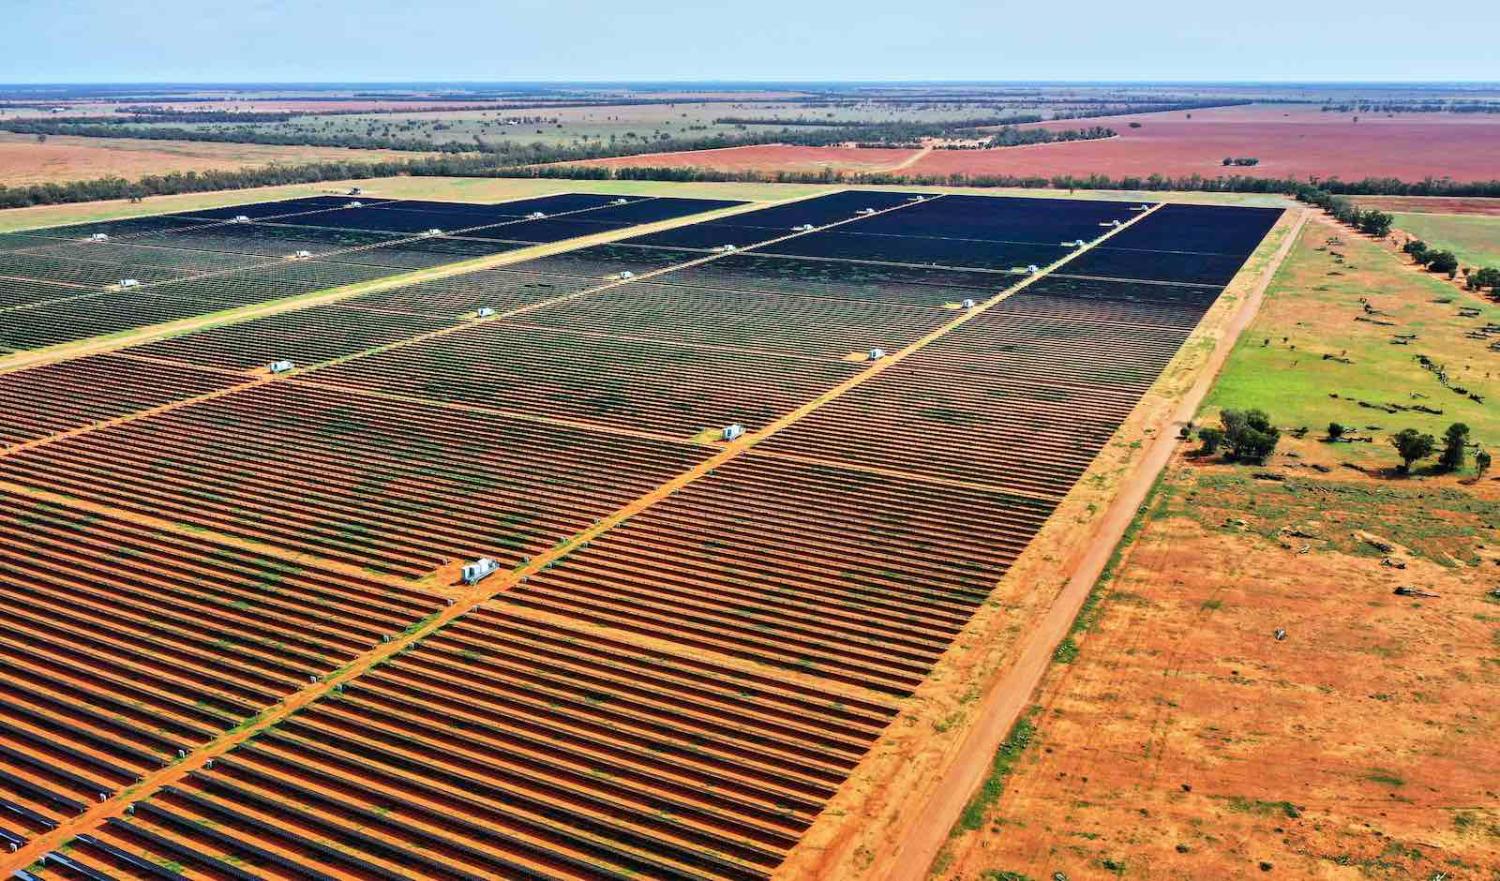 Solar farm in Nyngan, New South Wales (Andrew Merry/Getty Images)